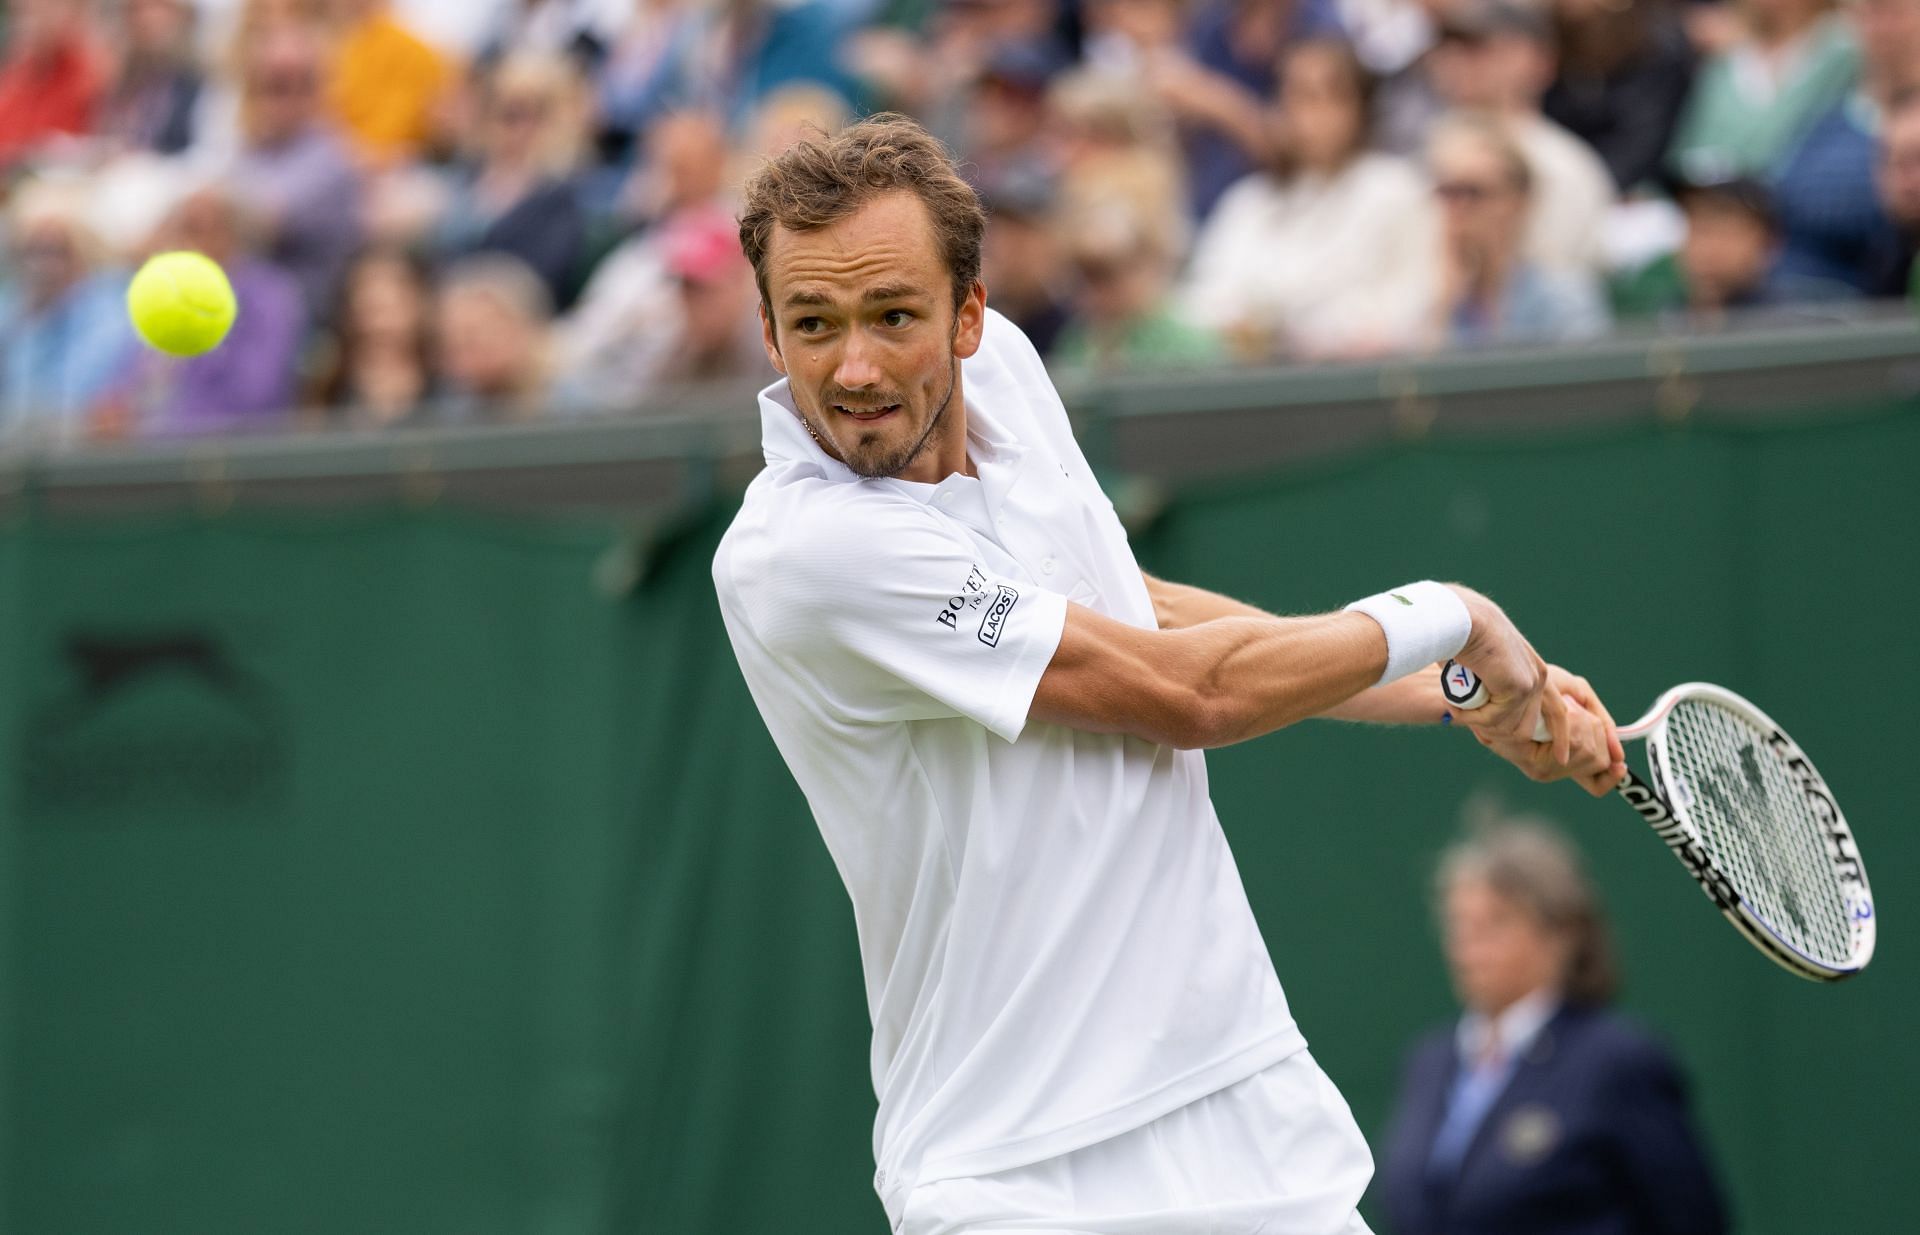 Daniil Medvedev competes at The Championships - Wimbledon 2021.